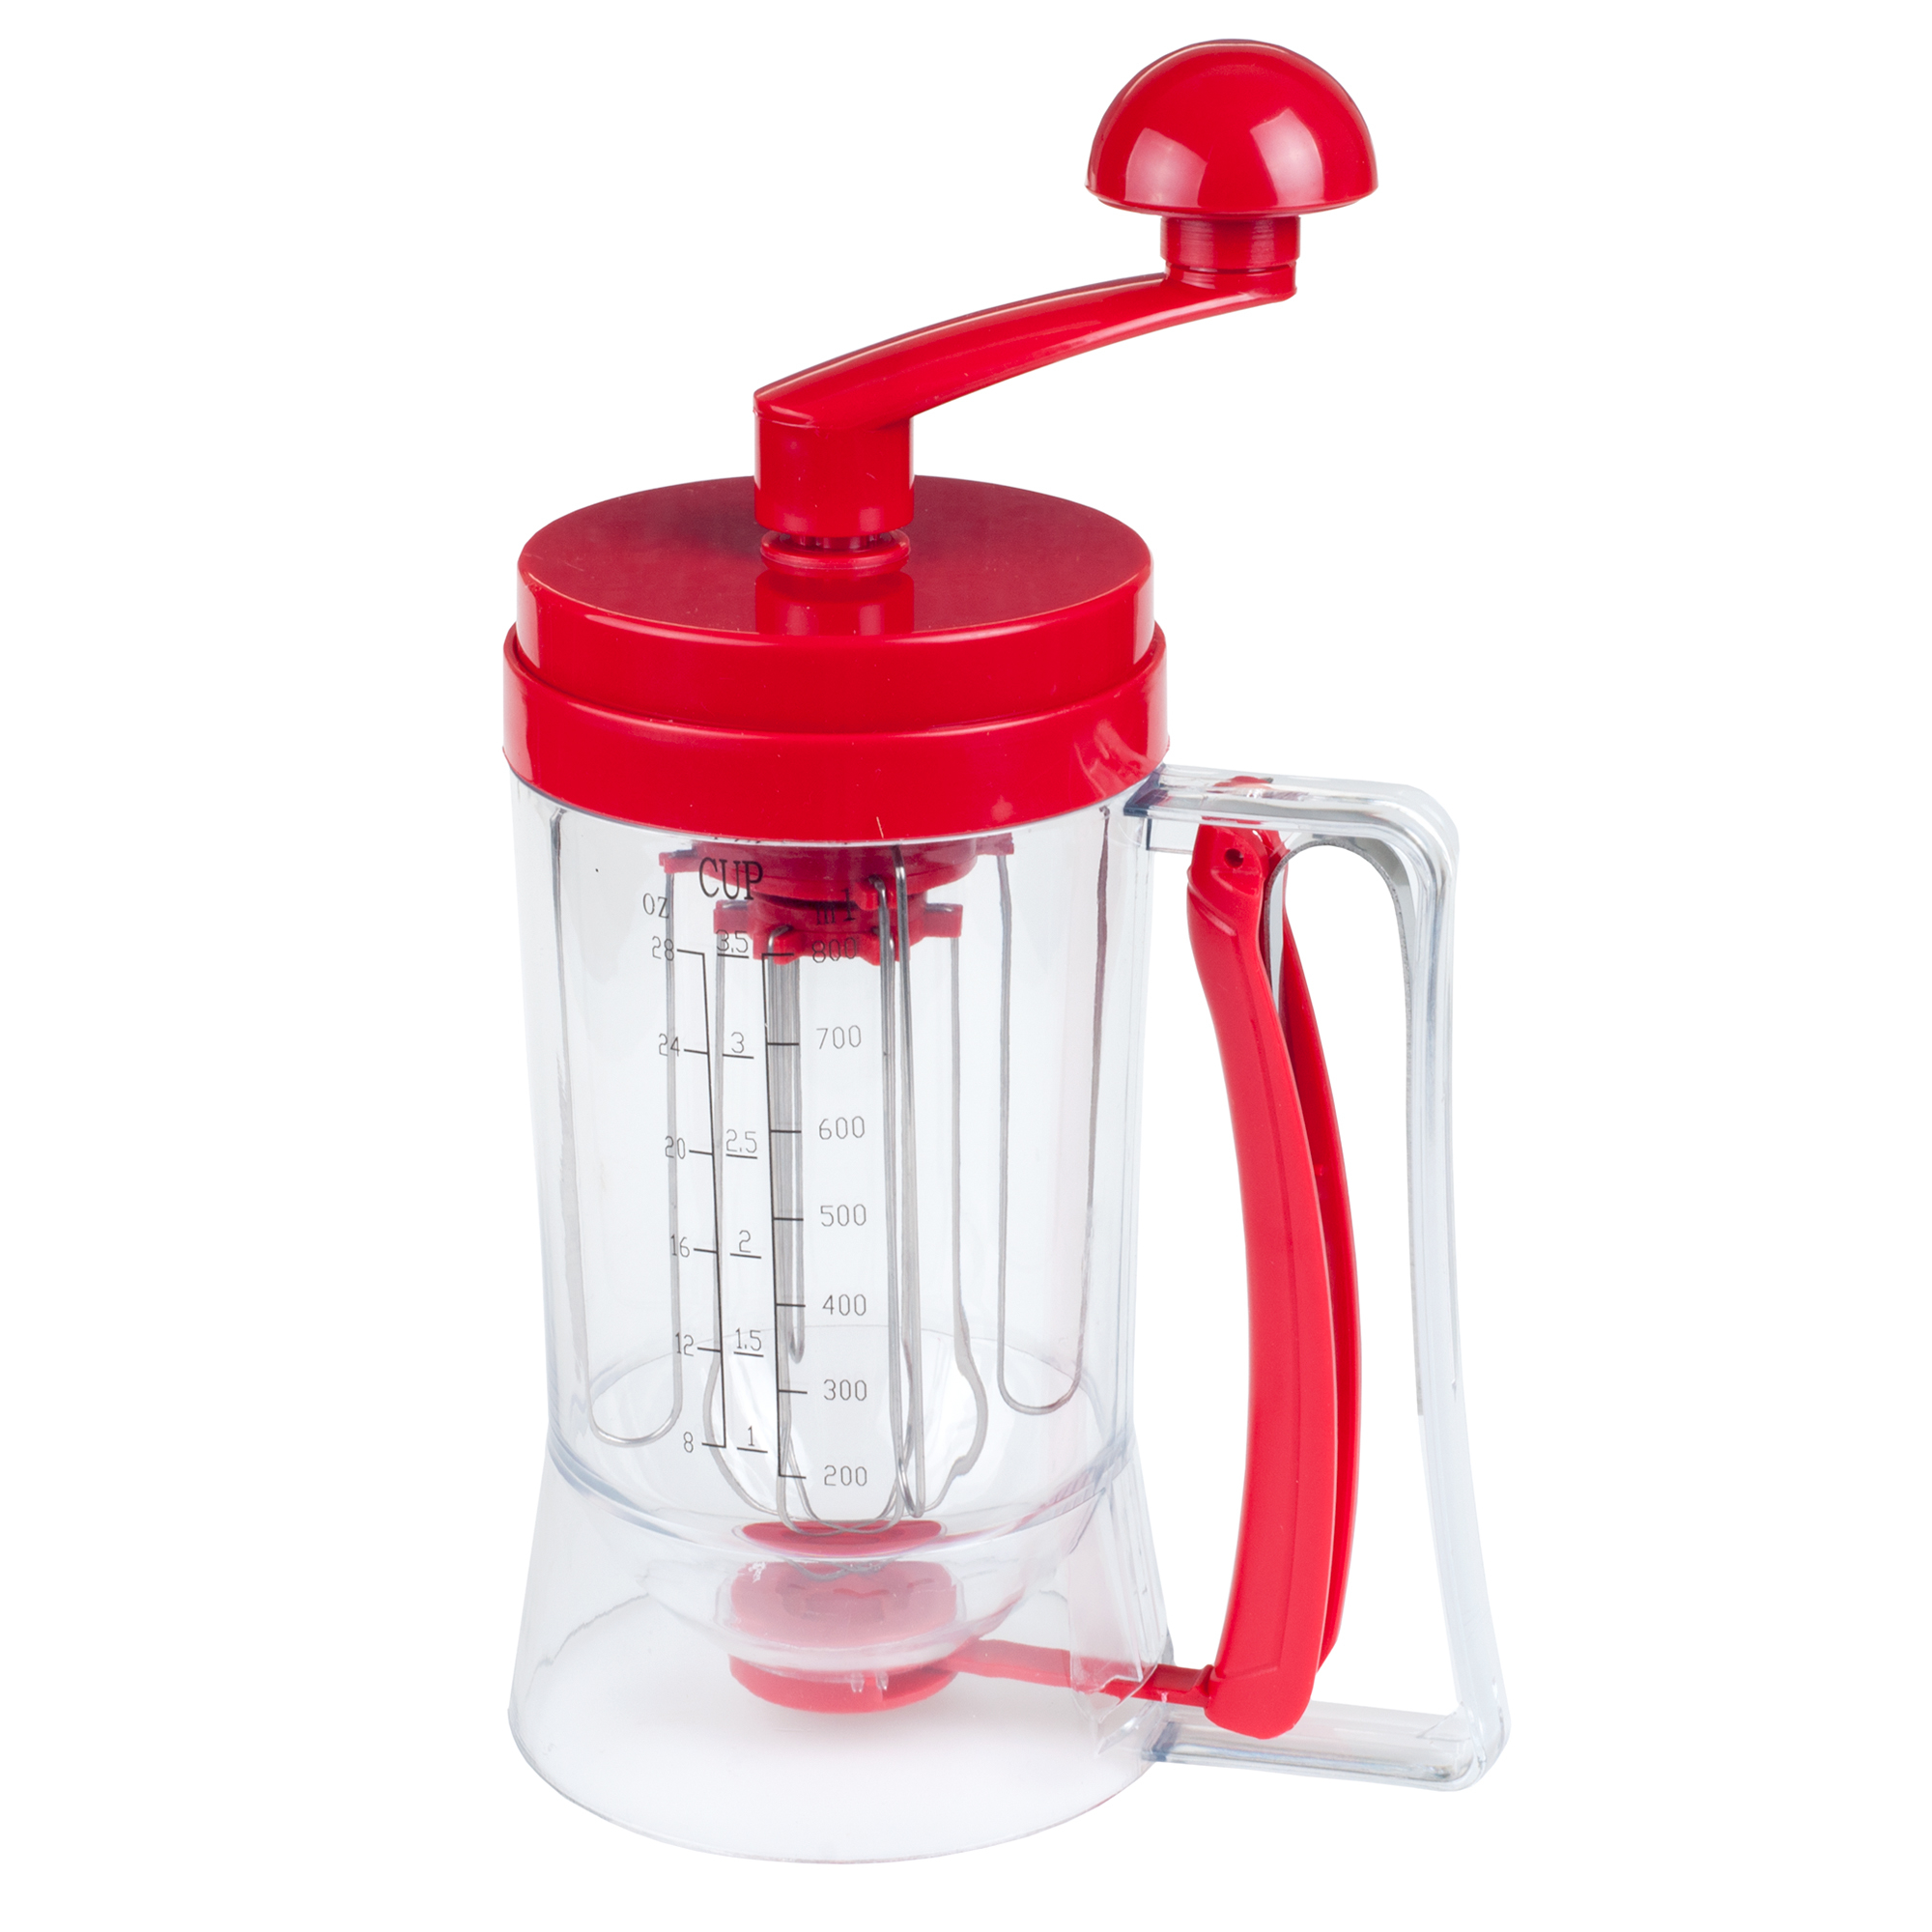 Chef Buddy Batter Dispenser and Mixing System 28 ounce capacity